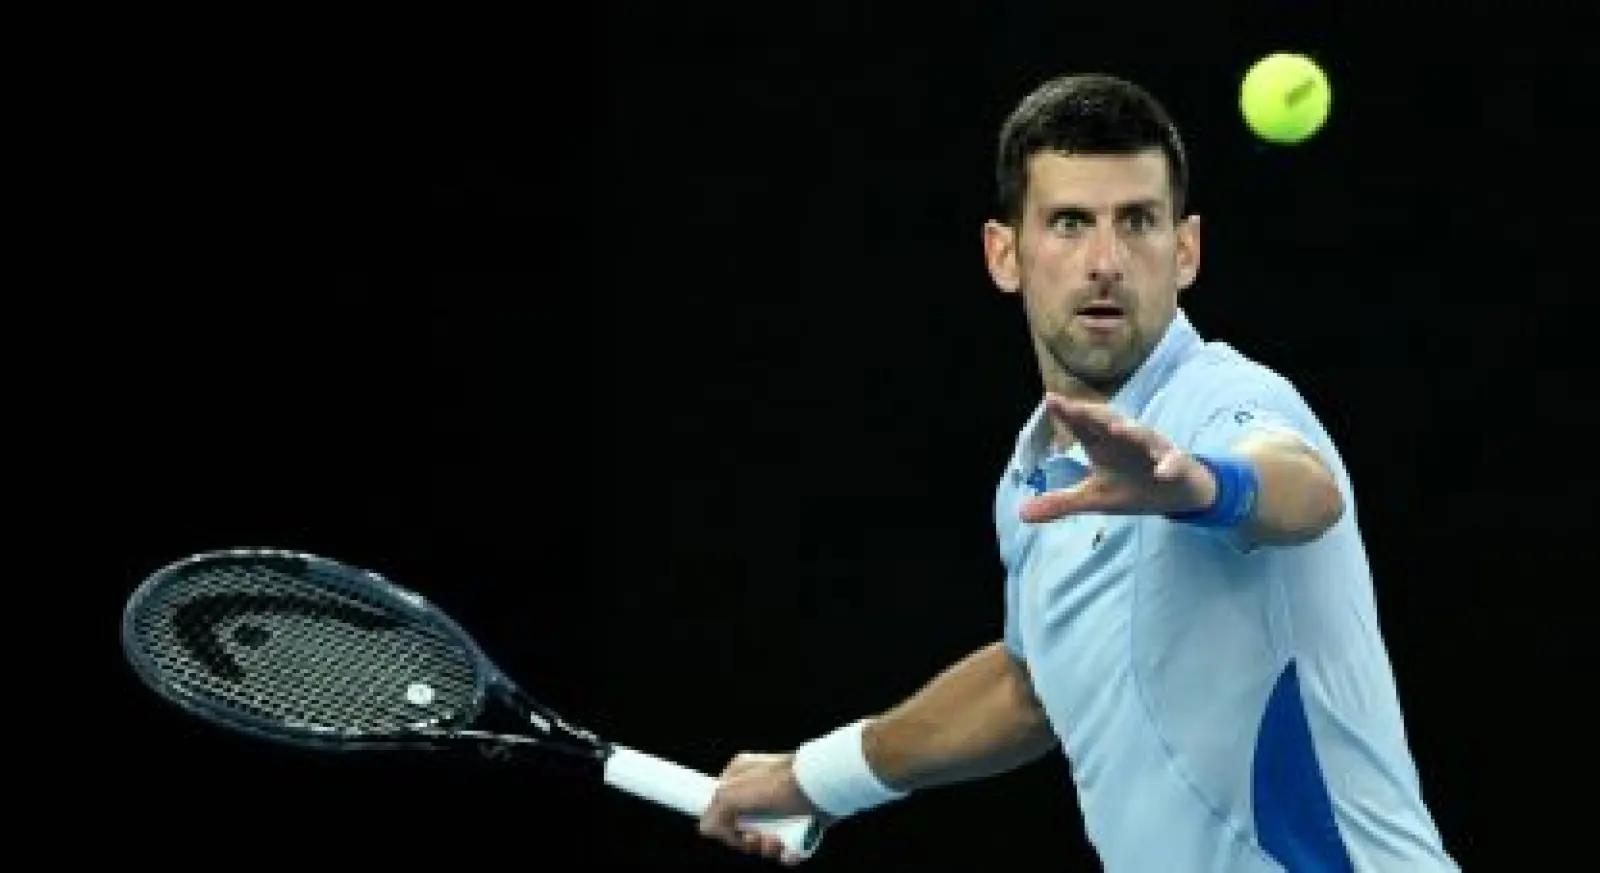 Djokovic made it to the quarterfinals of Australian Open for the 14th time